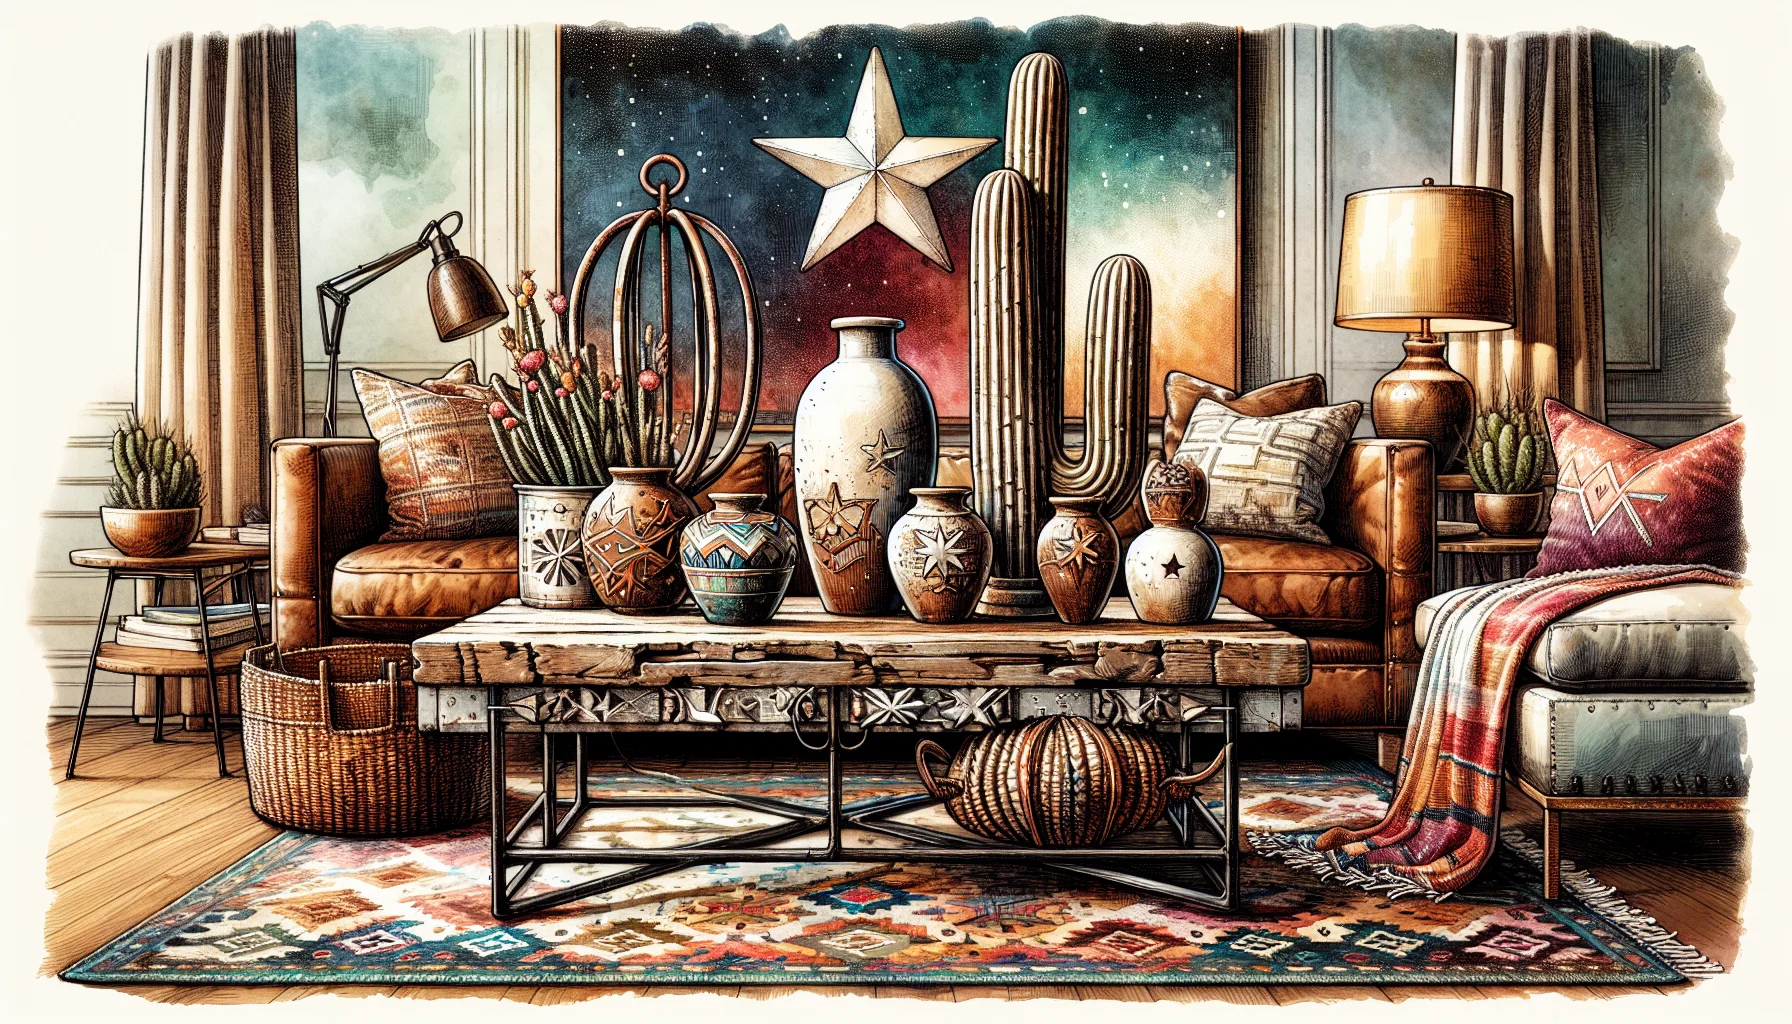 Artistic home decor items displayed in a stylish setting